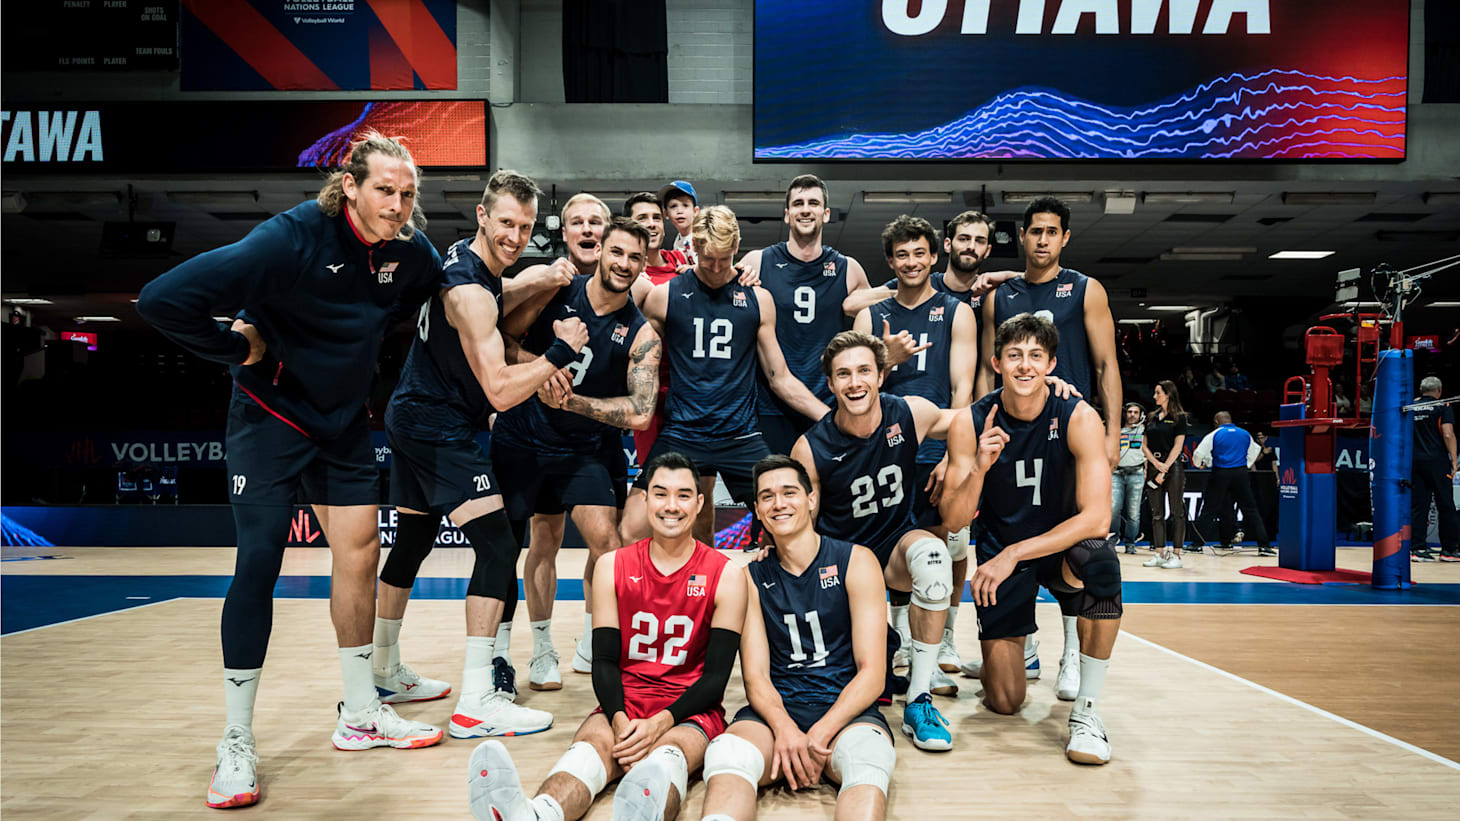 Volleyball Road to Paris Olympic Qualifier Team USA